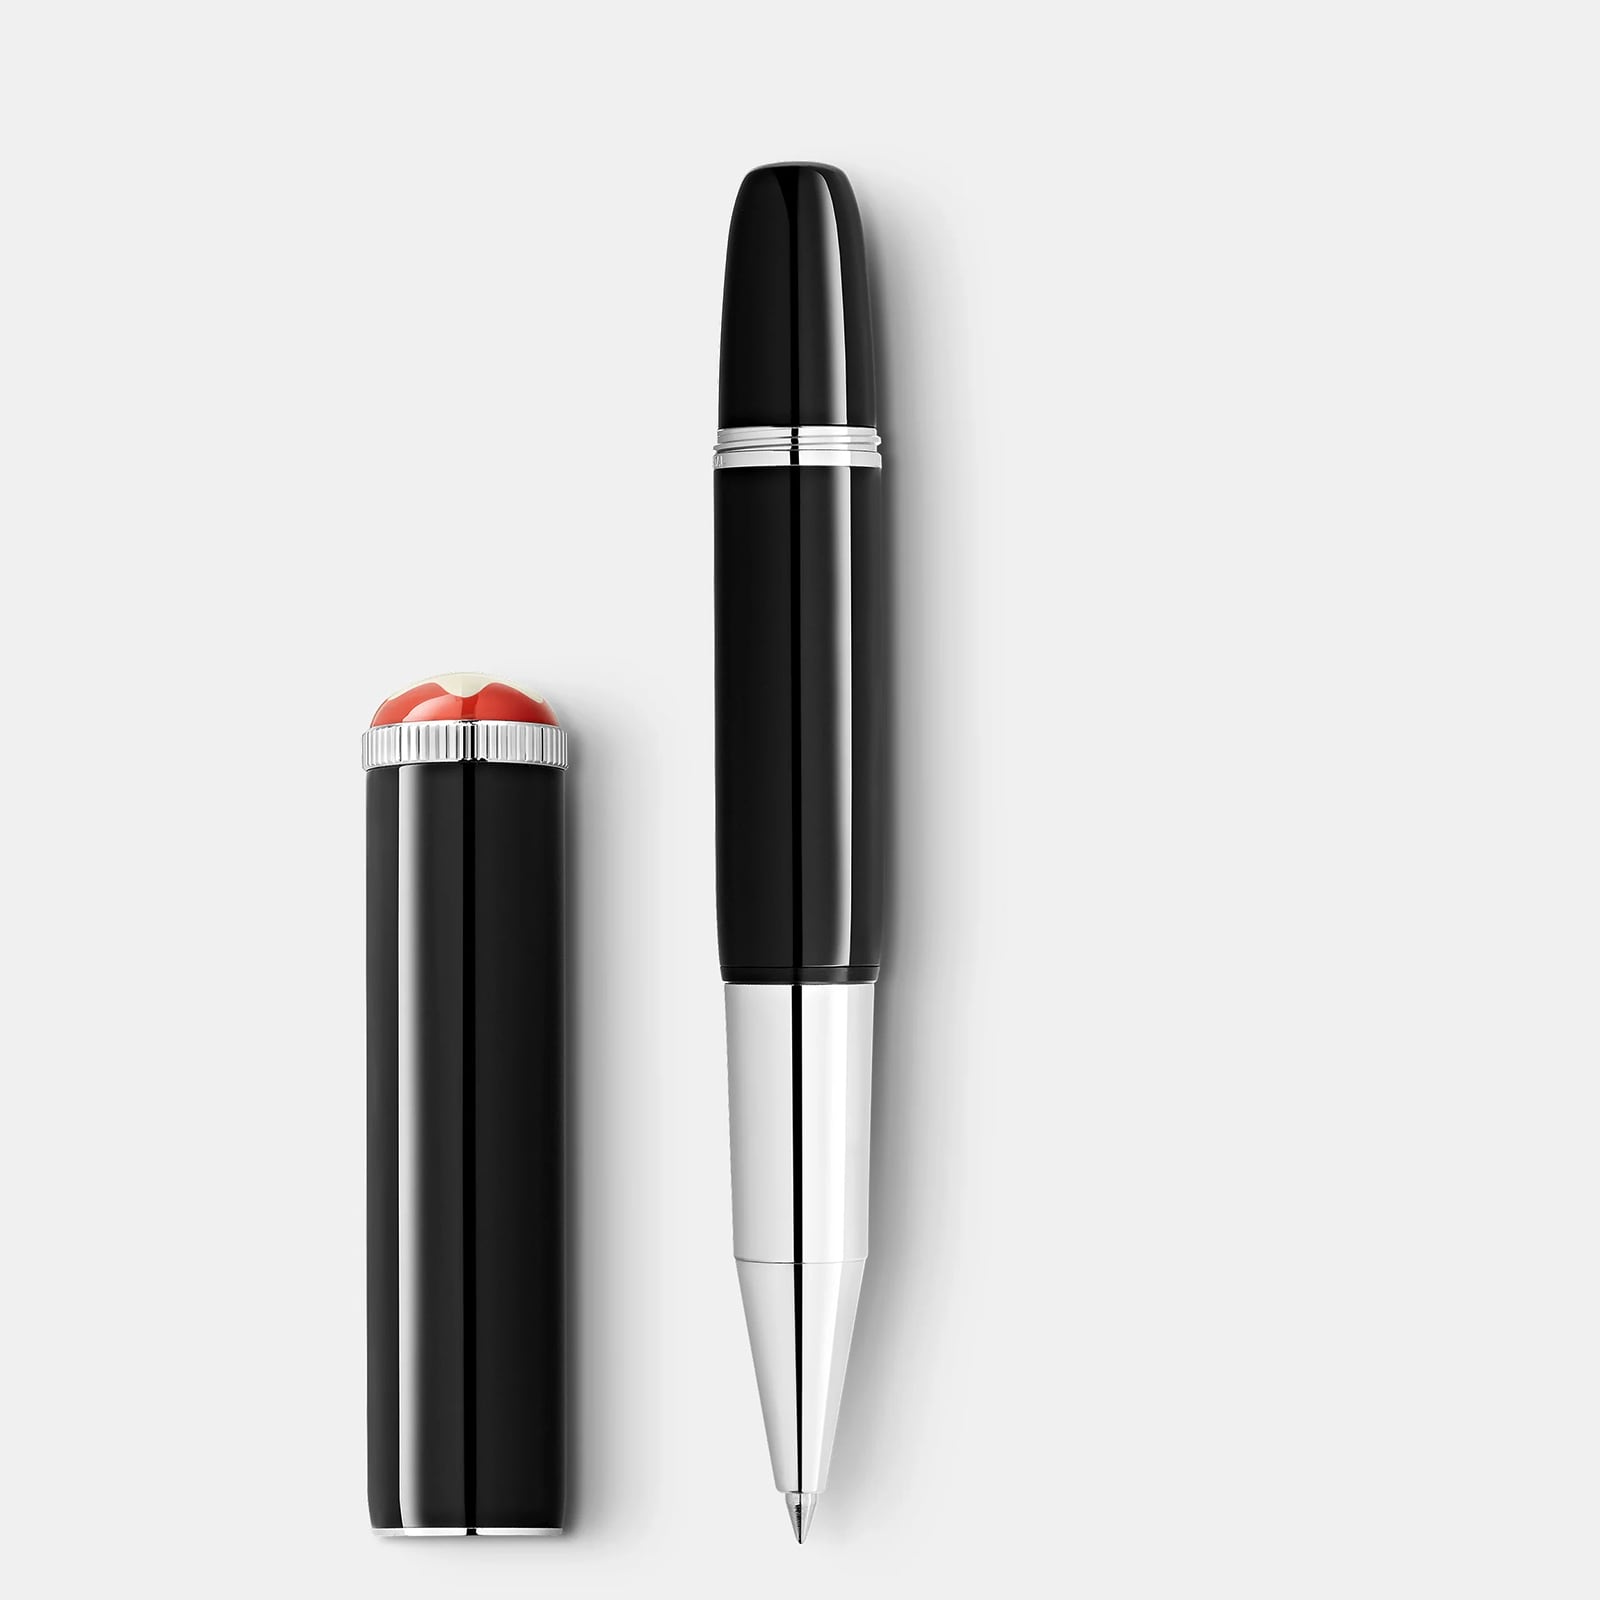 Image of Montblanc Heritage Rouge et Noir "Baby" Special Edition Black Rollerball